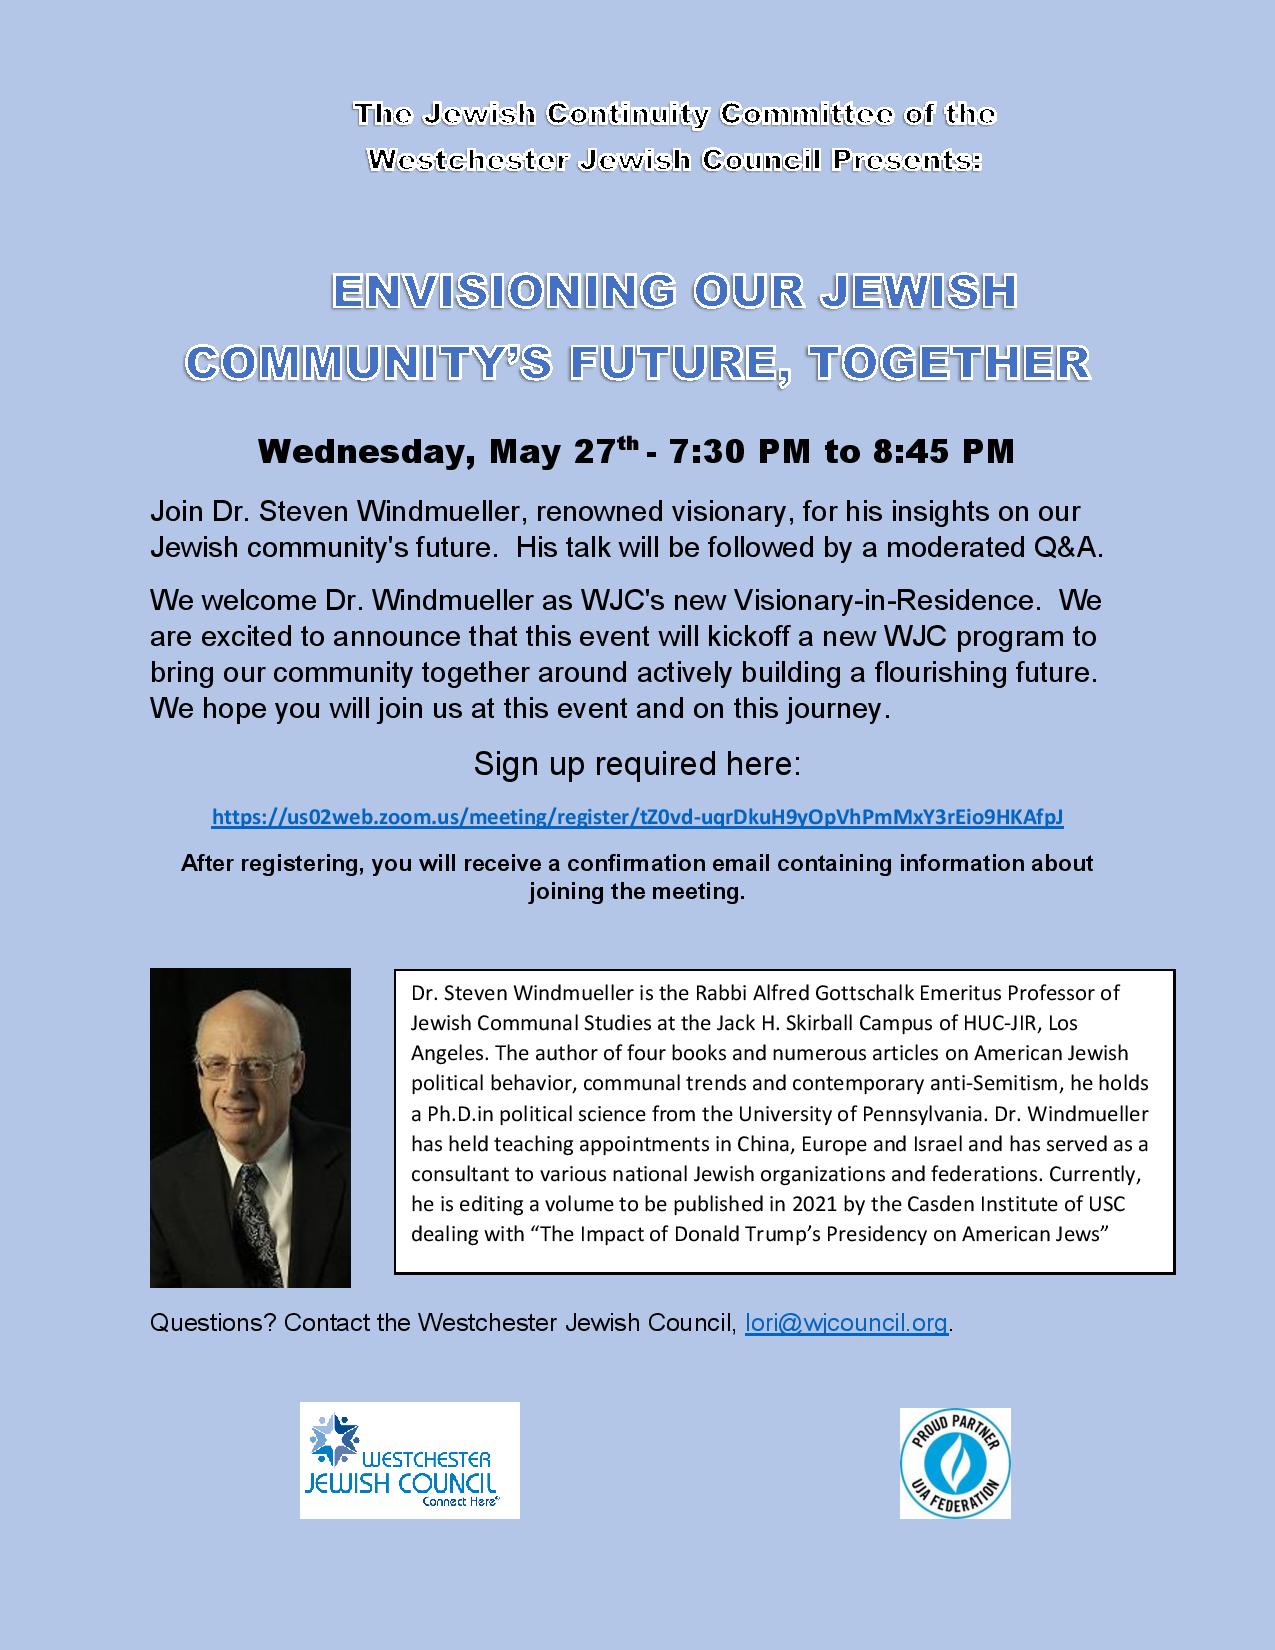 The Jewish Visioning Committee of the Westchester Jewish Council invites you to: ENVISIONING OUR JEWISH COMMUNITY’S FUTURE, TOGETHER